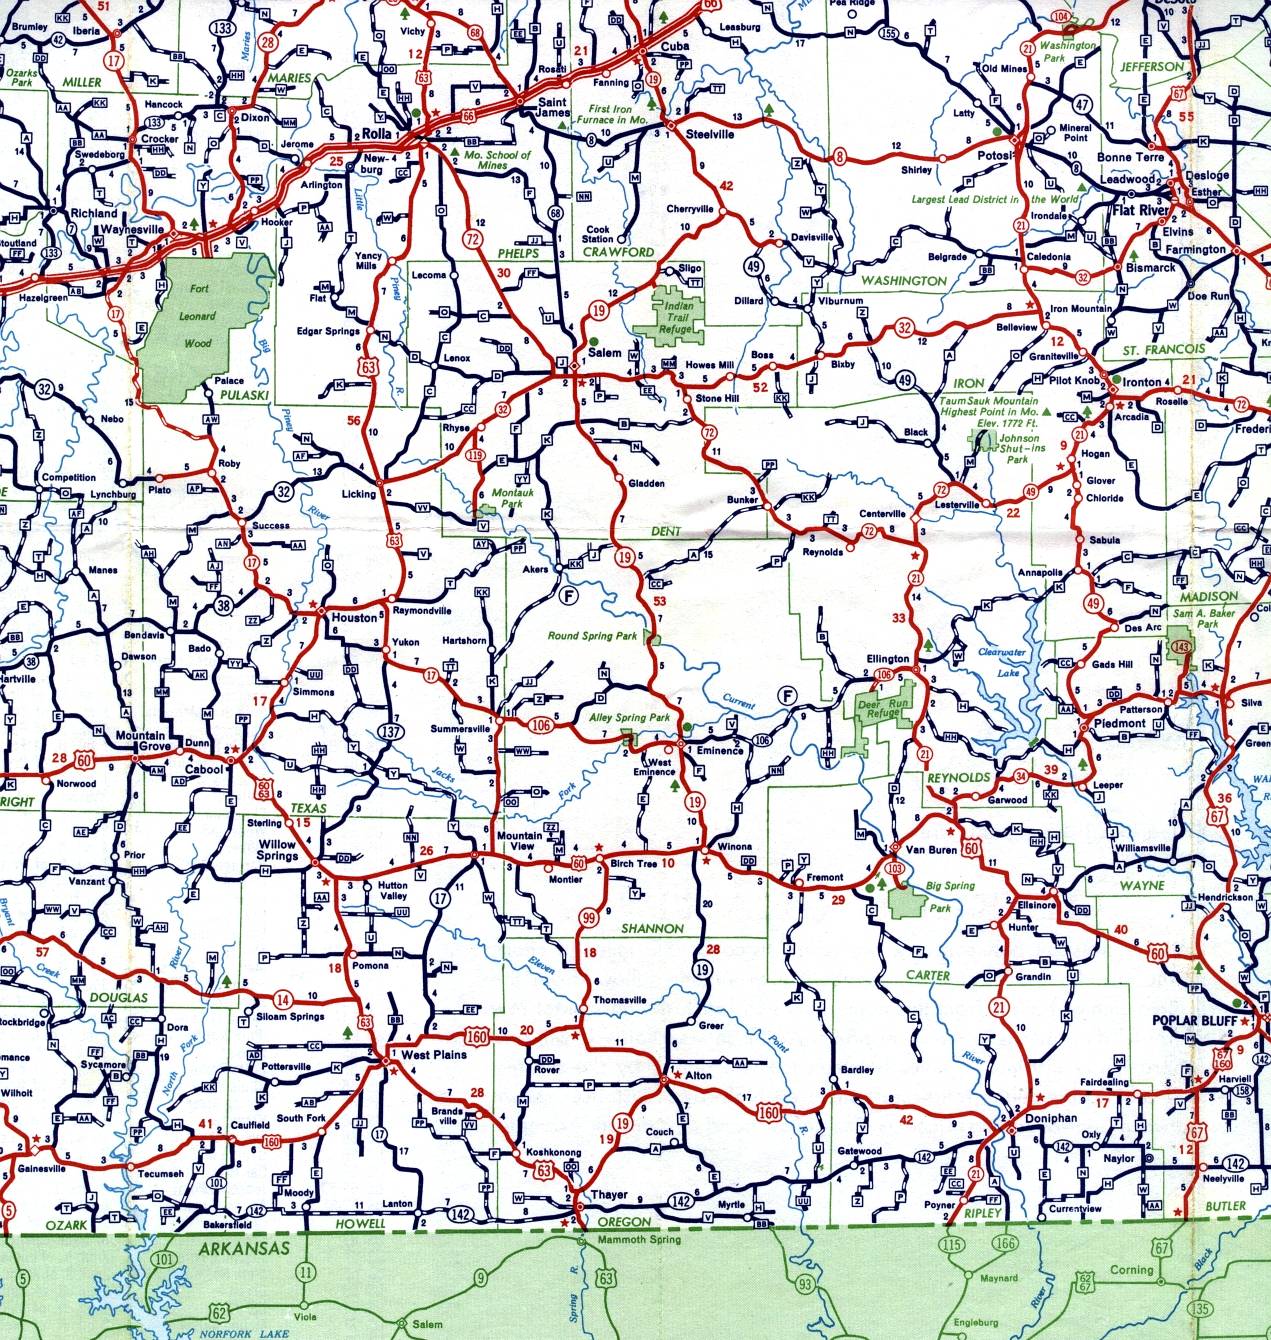 Southeast-central section of Missouri from 1959 official highway map